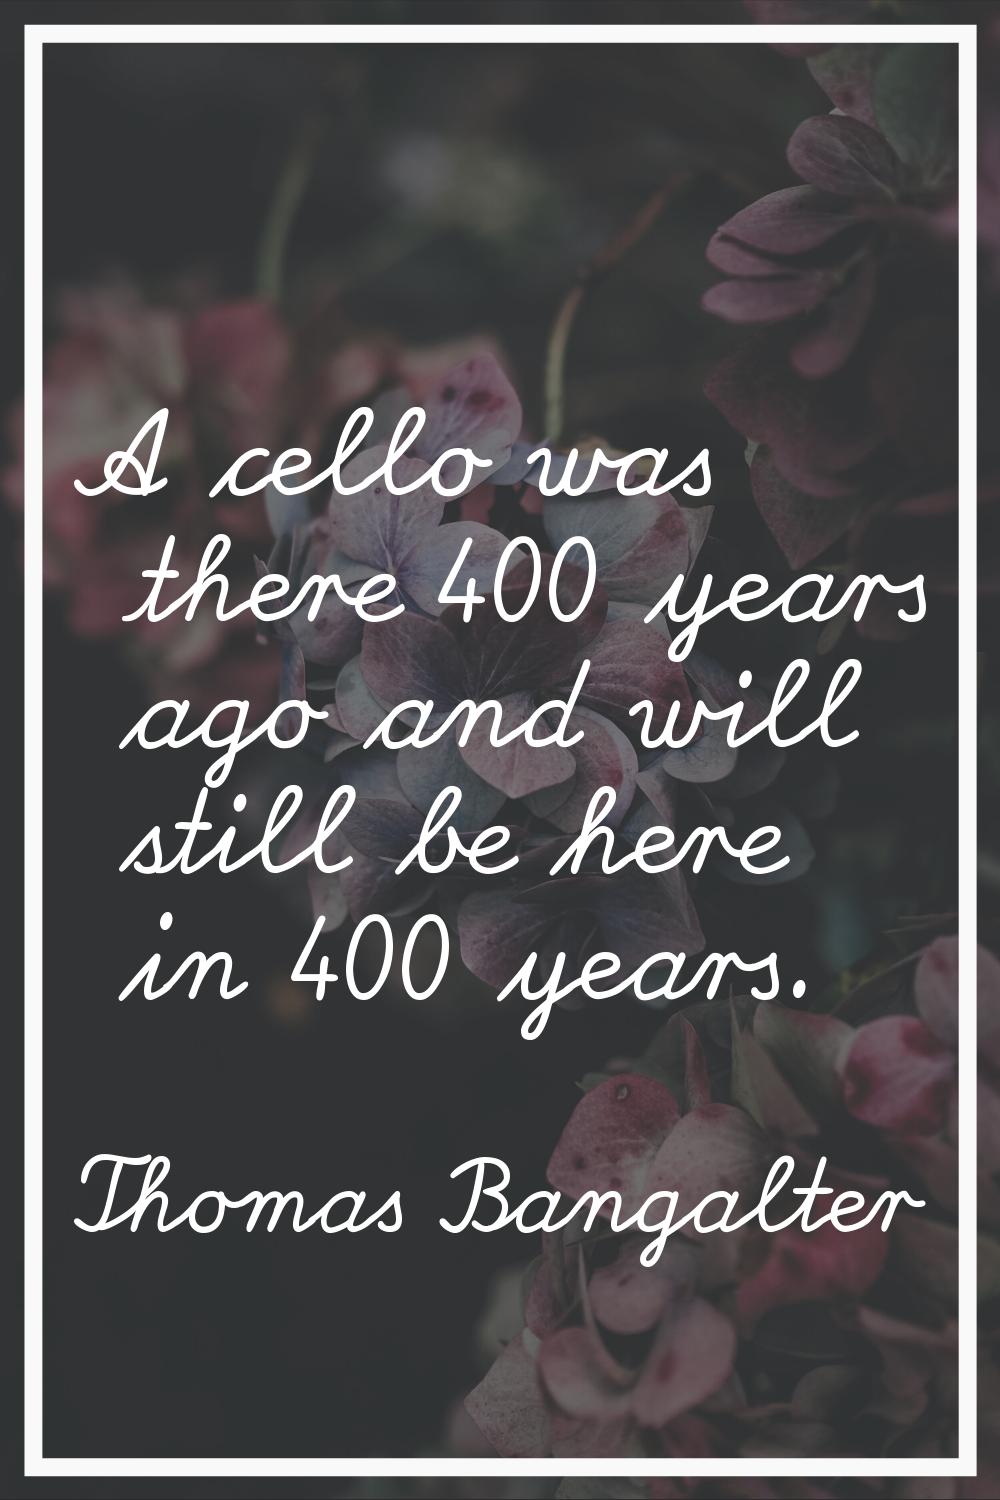 A cello was there 400 years ago and will still be here in 400 years.